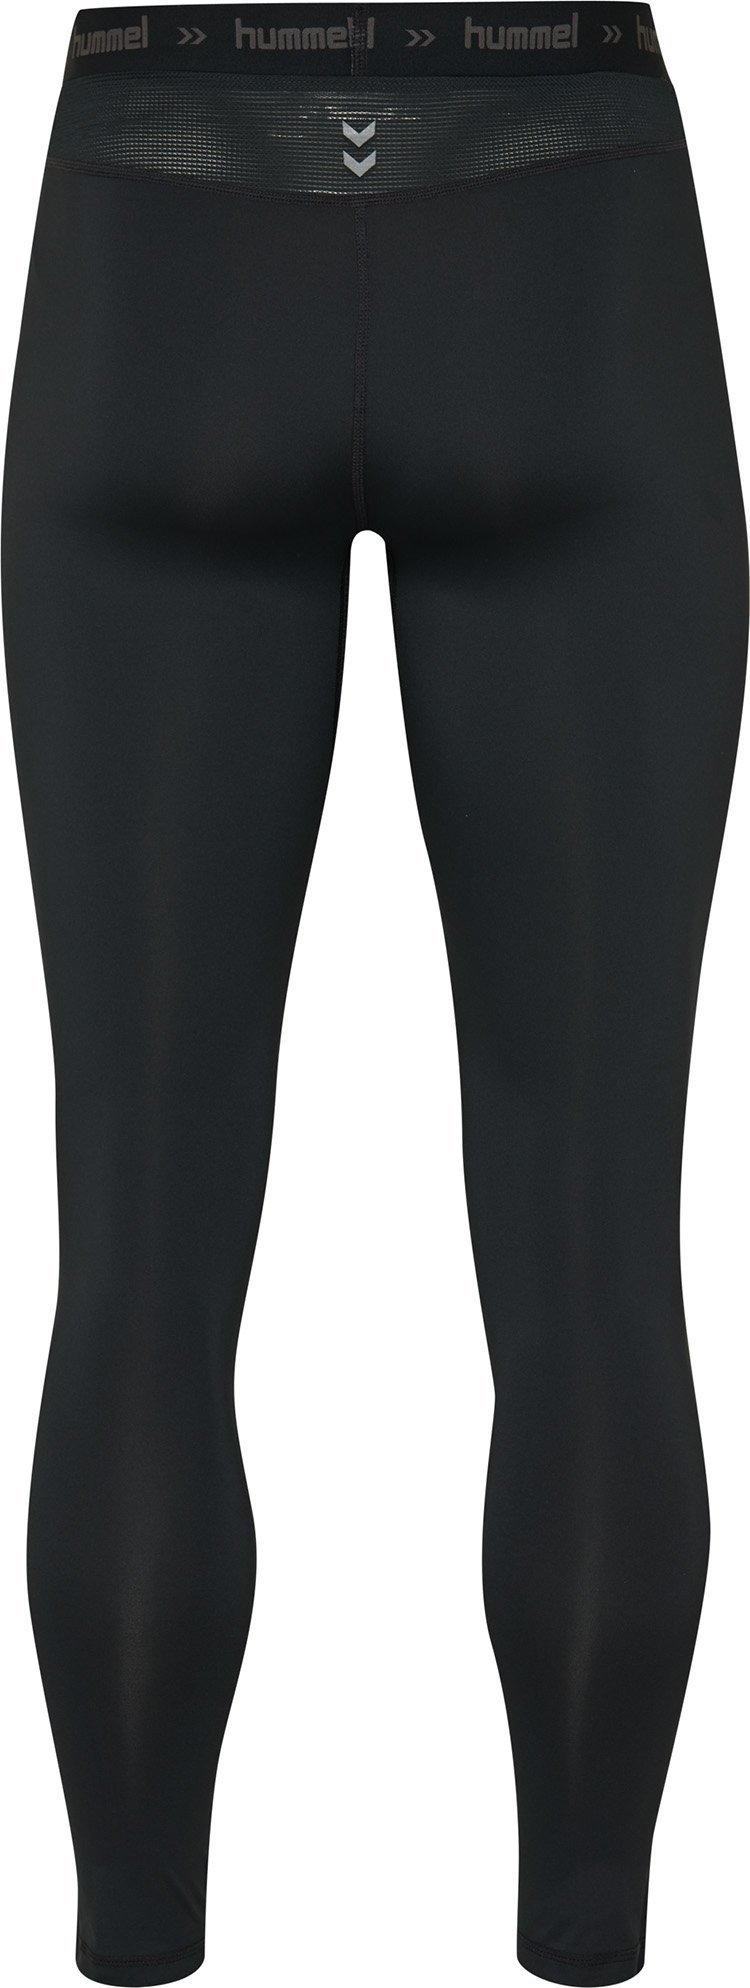 Parlament Uddybe kobling hummel First Performance Tights Herre